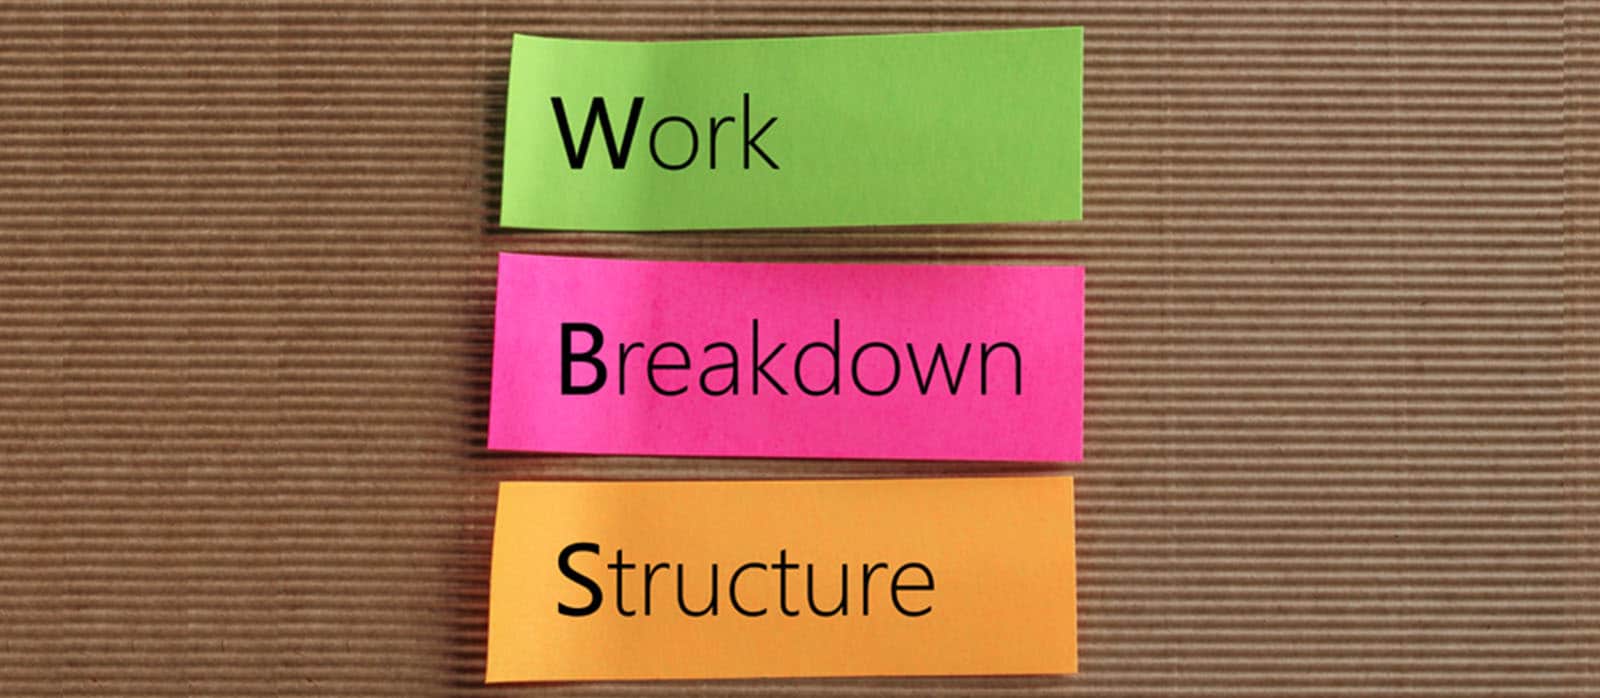 The importance of a good Work Breakdown Structure